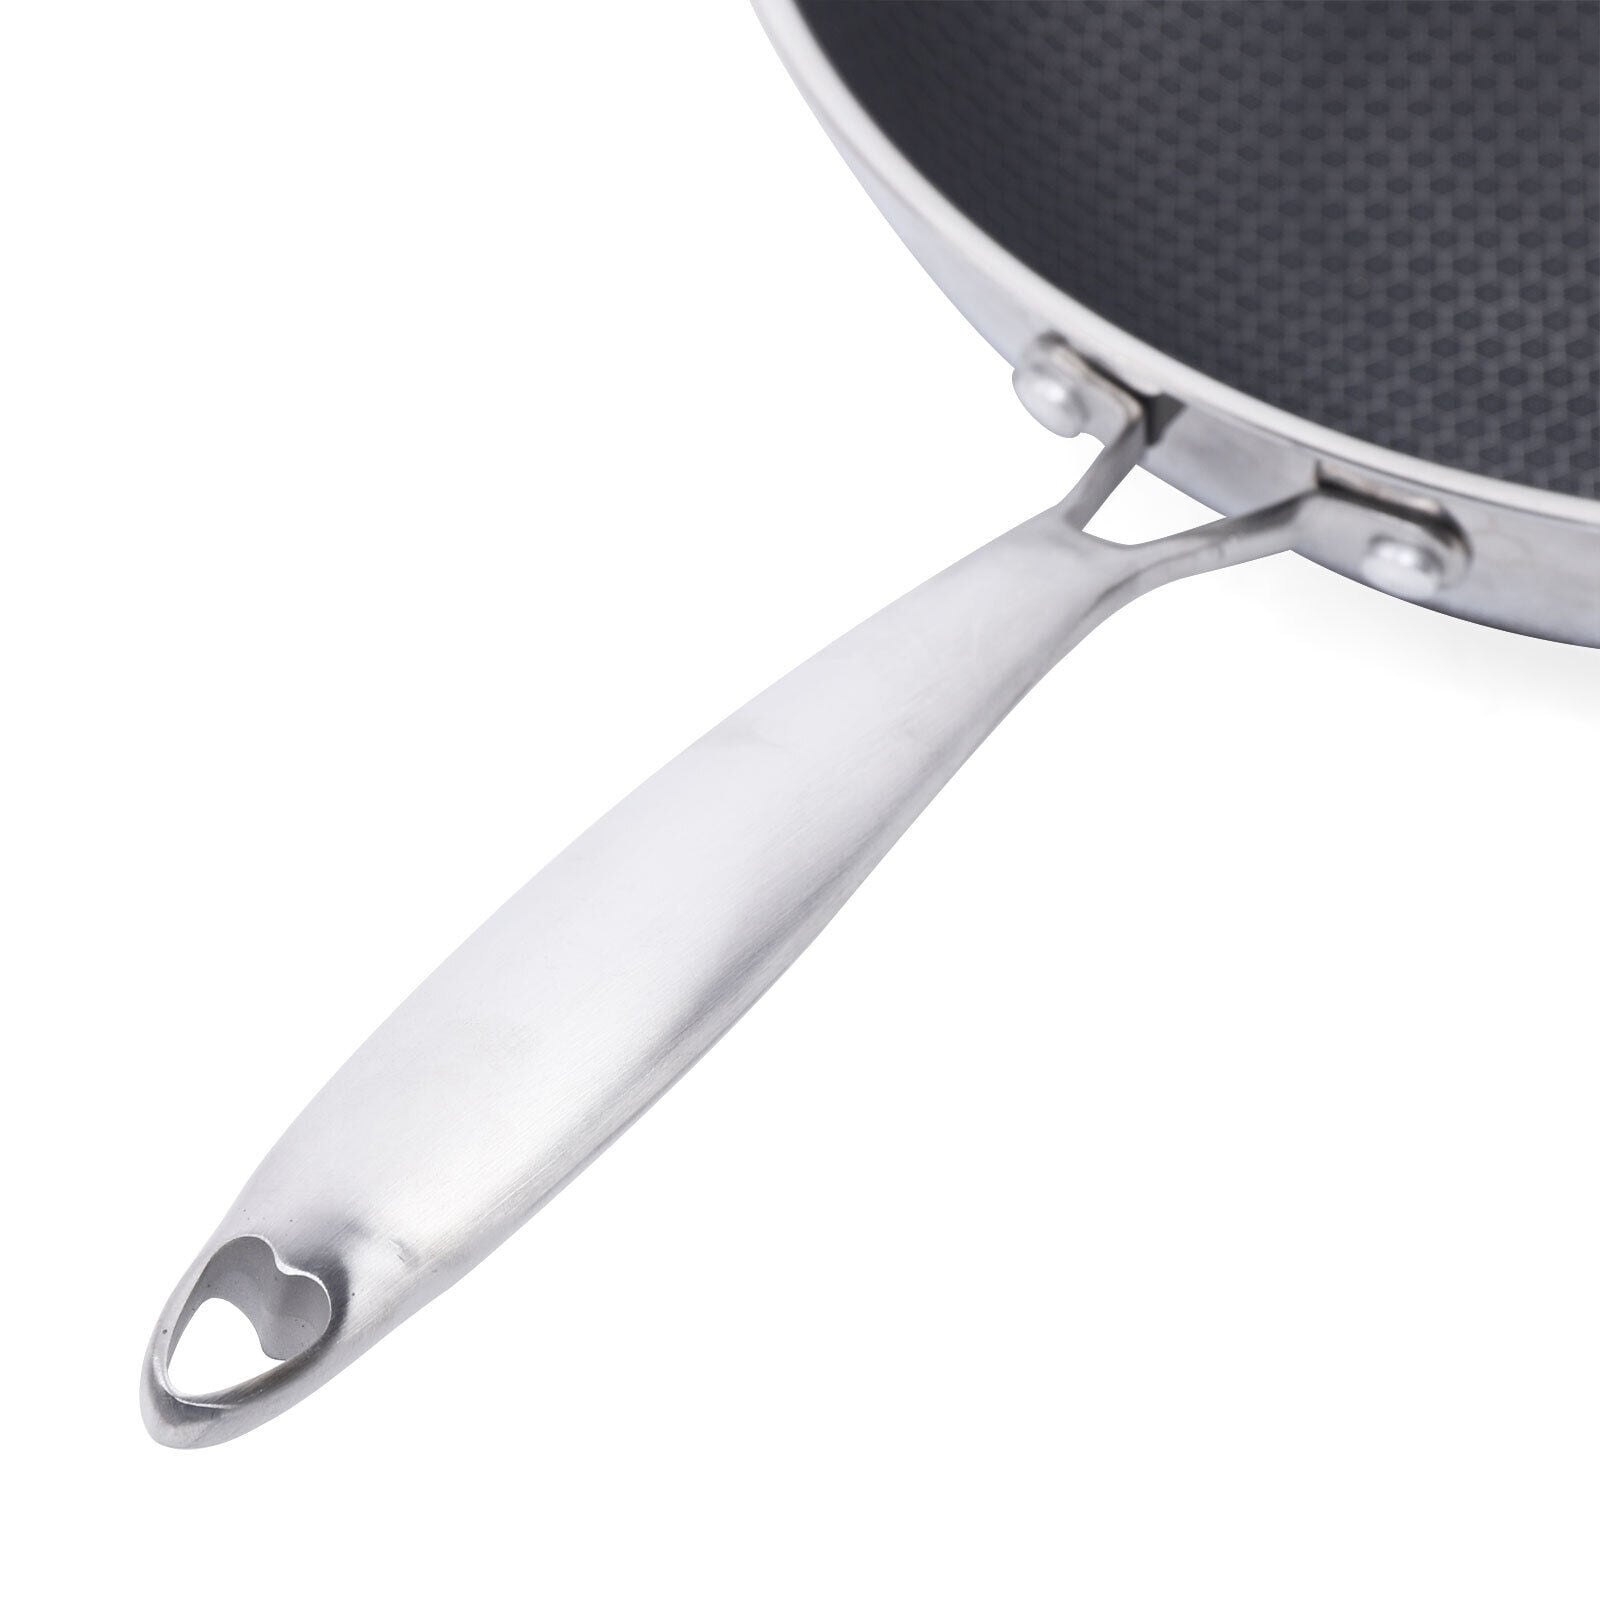 Stainless Steel Wok Honeycomb Grain Frying Pan Handled Kitchenware Traditional Pan, Size: 56X34X8.5CM